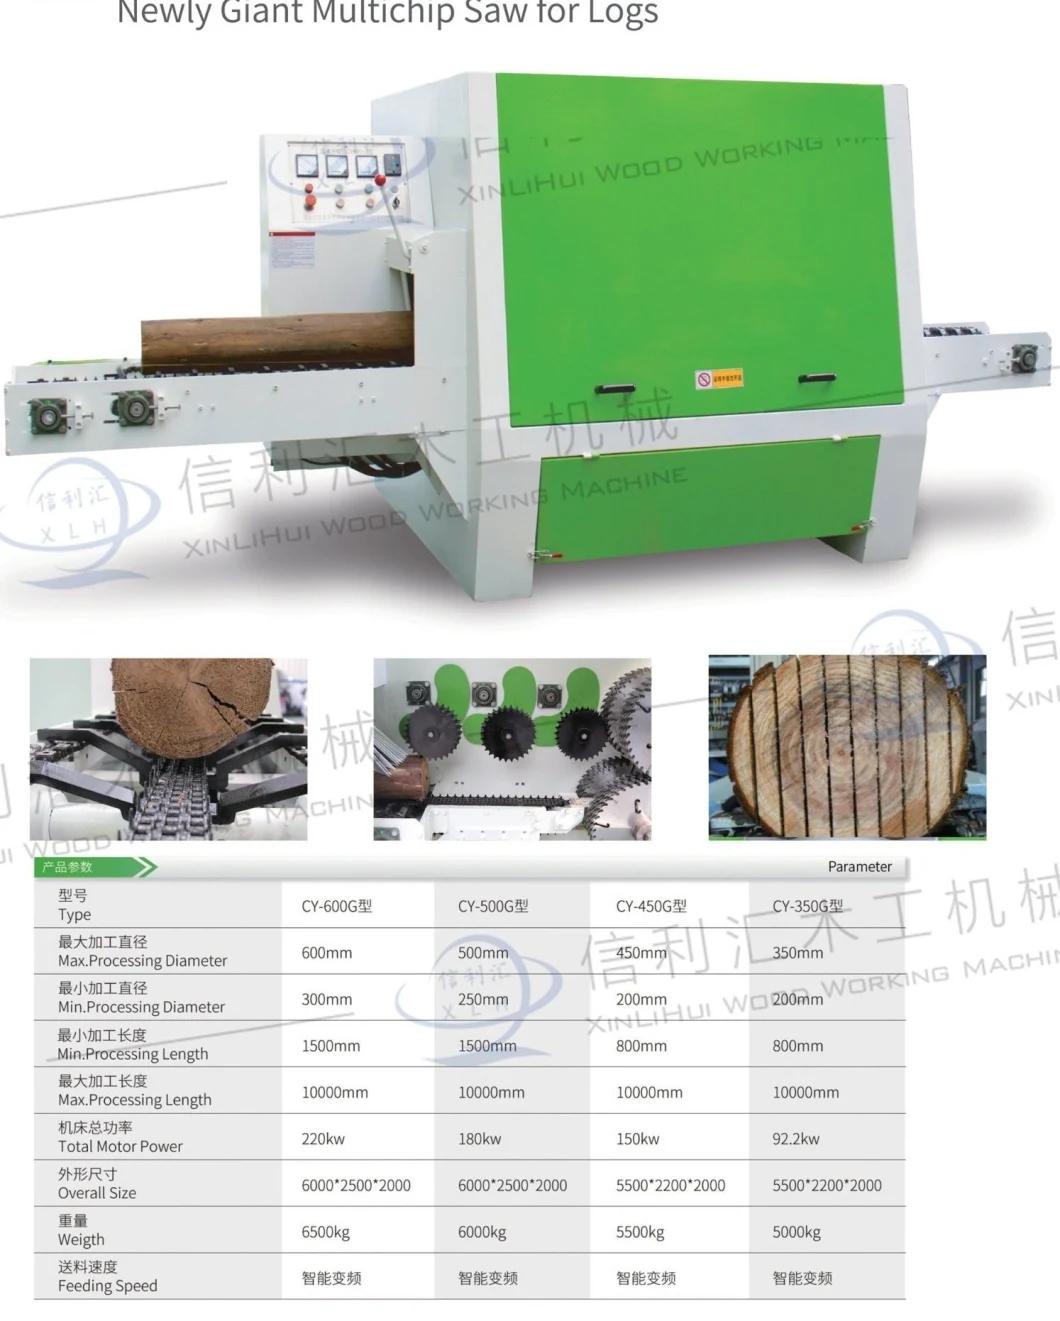 Multi-Blade Saw, Upper and Lower Axis, Wood Saw, Precision Speed Multi-Blade Saw for Woodworking, Automatic Multi-Blade Saw for Round Wood